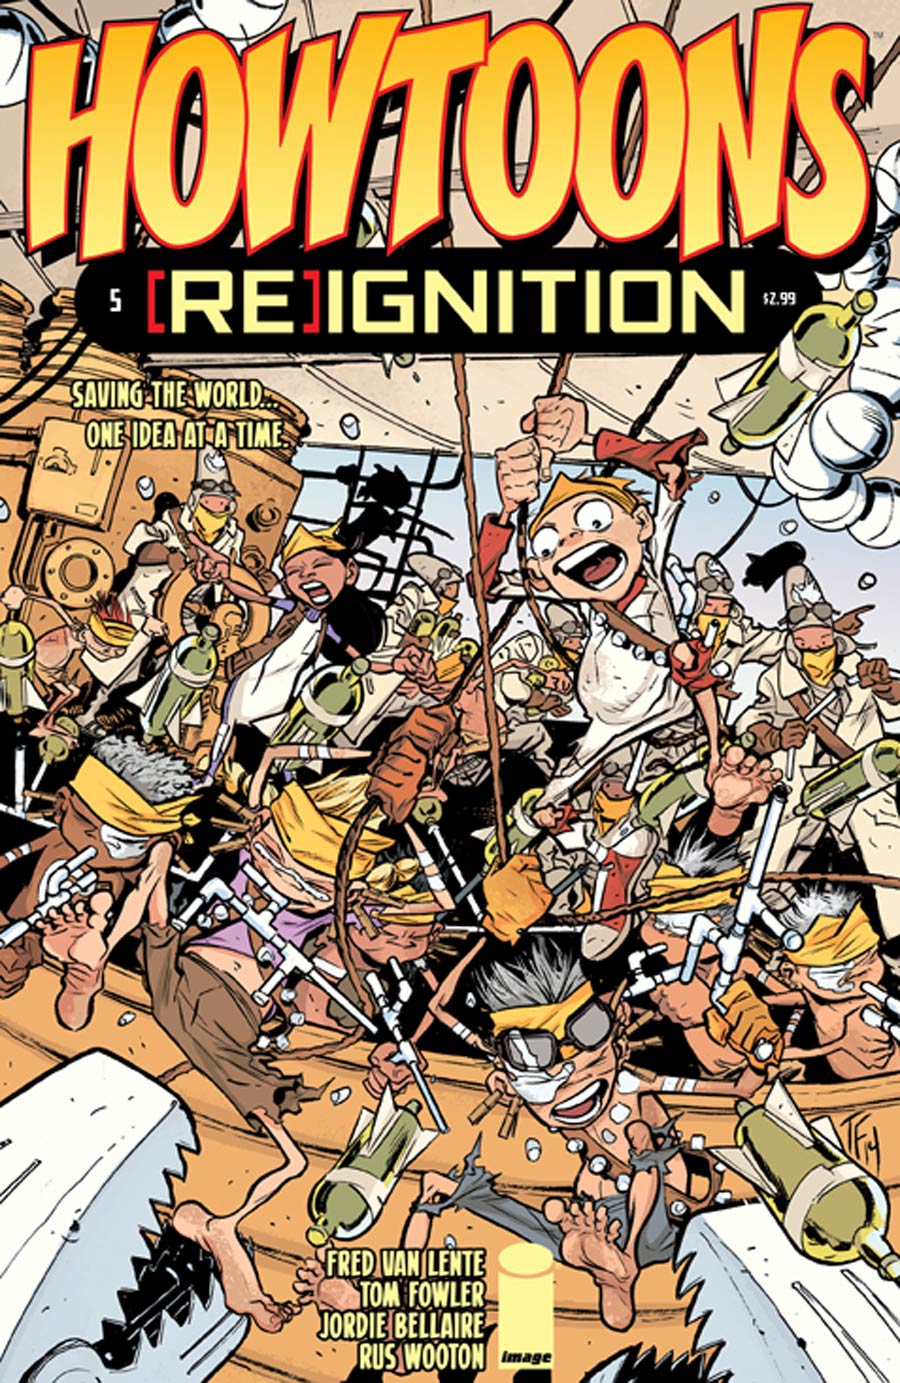 Howtoons (Re)Ignition #5